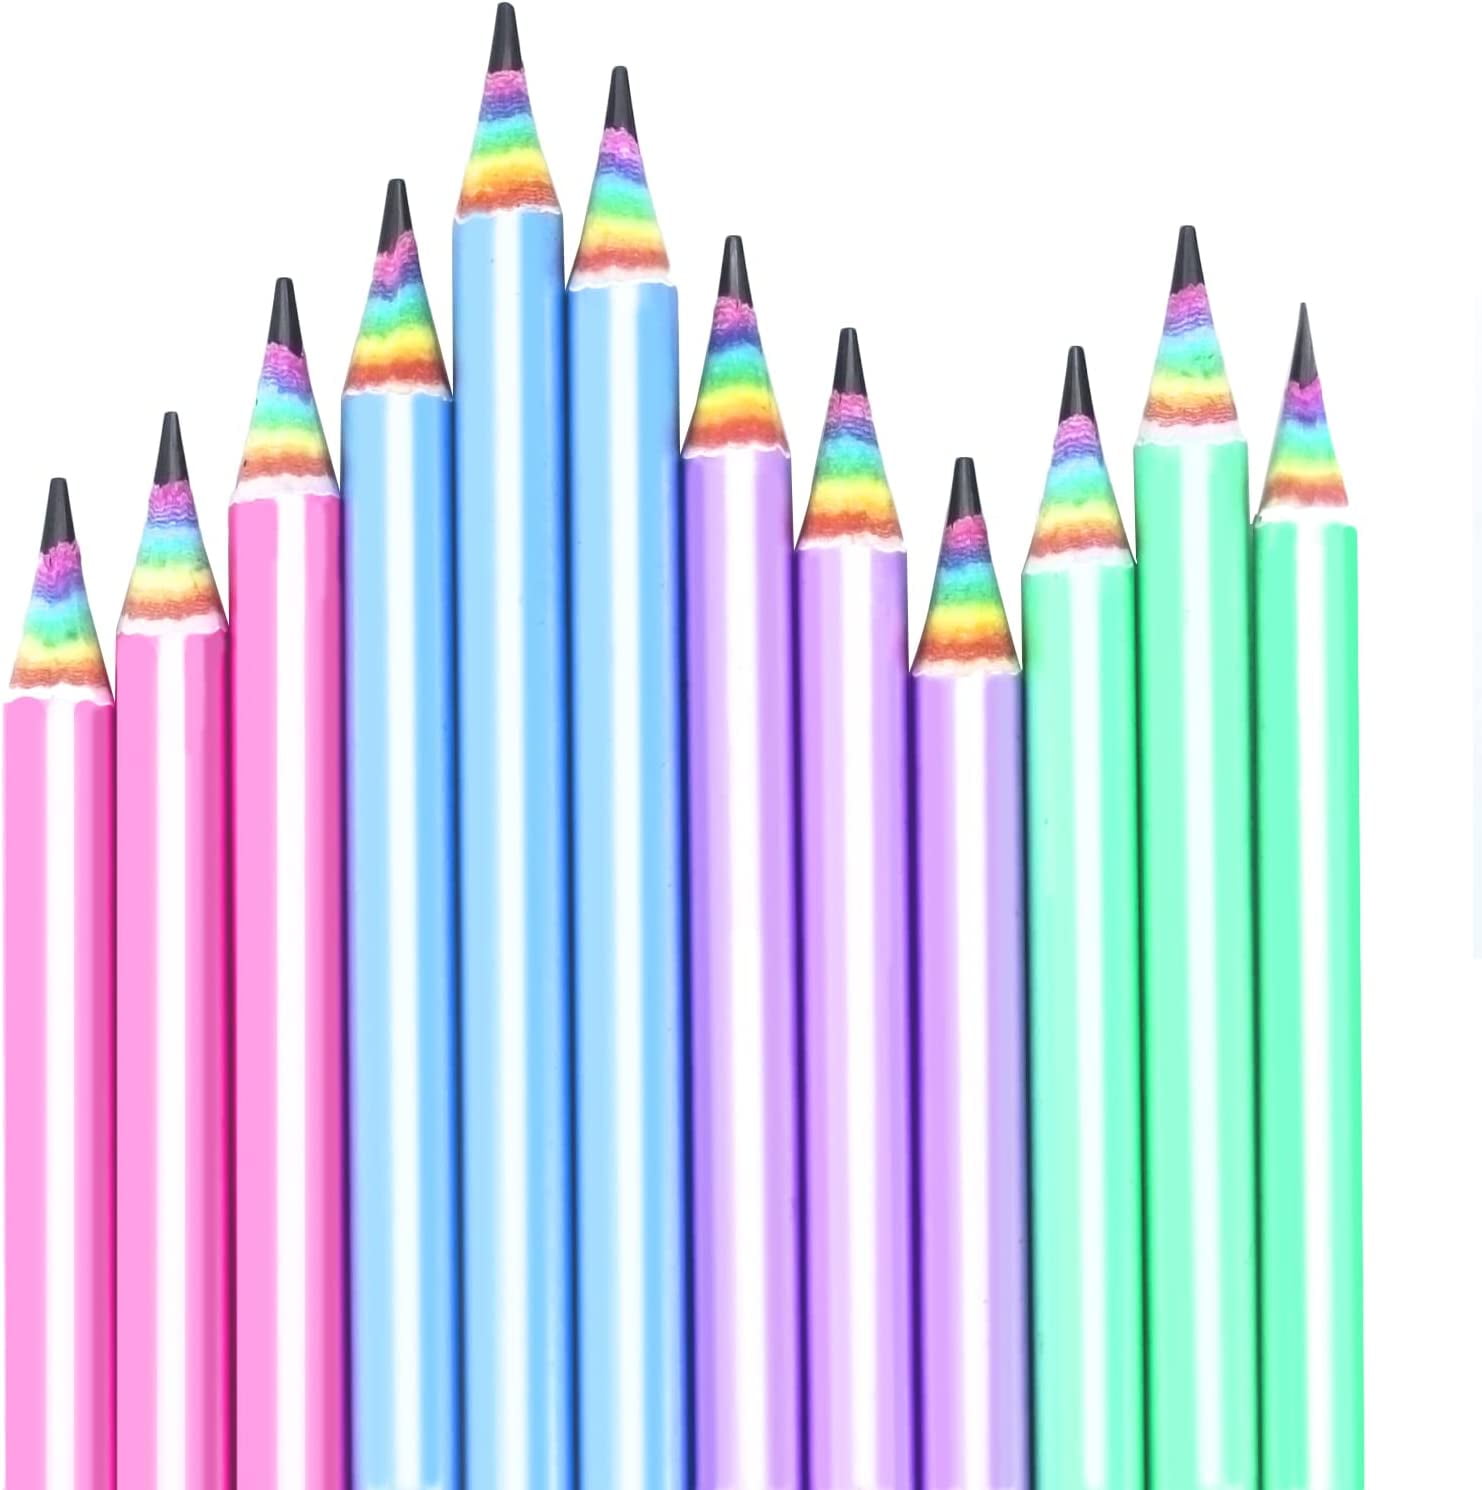 Heldig 12-Pack Eco-friendly Wood & Plastic Free Rainbow Recycled Paper HB  Pencils for School and Office SuppliesB 